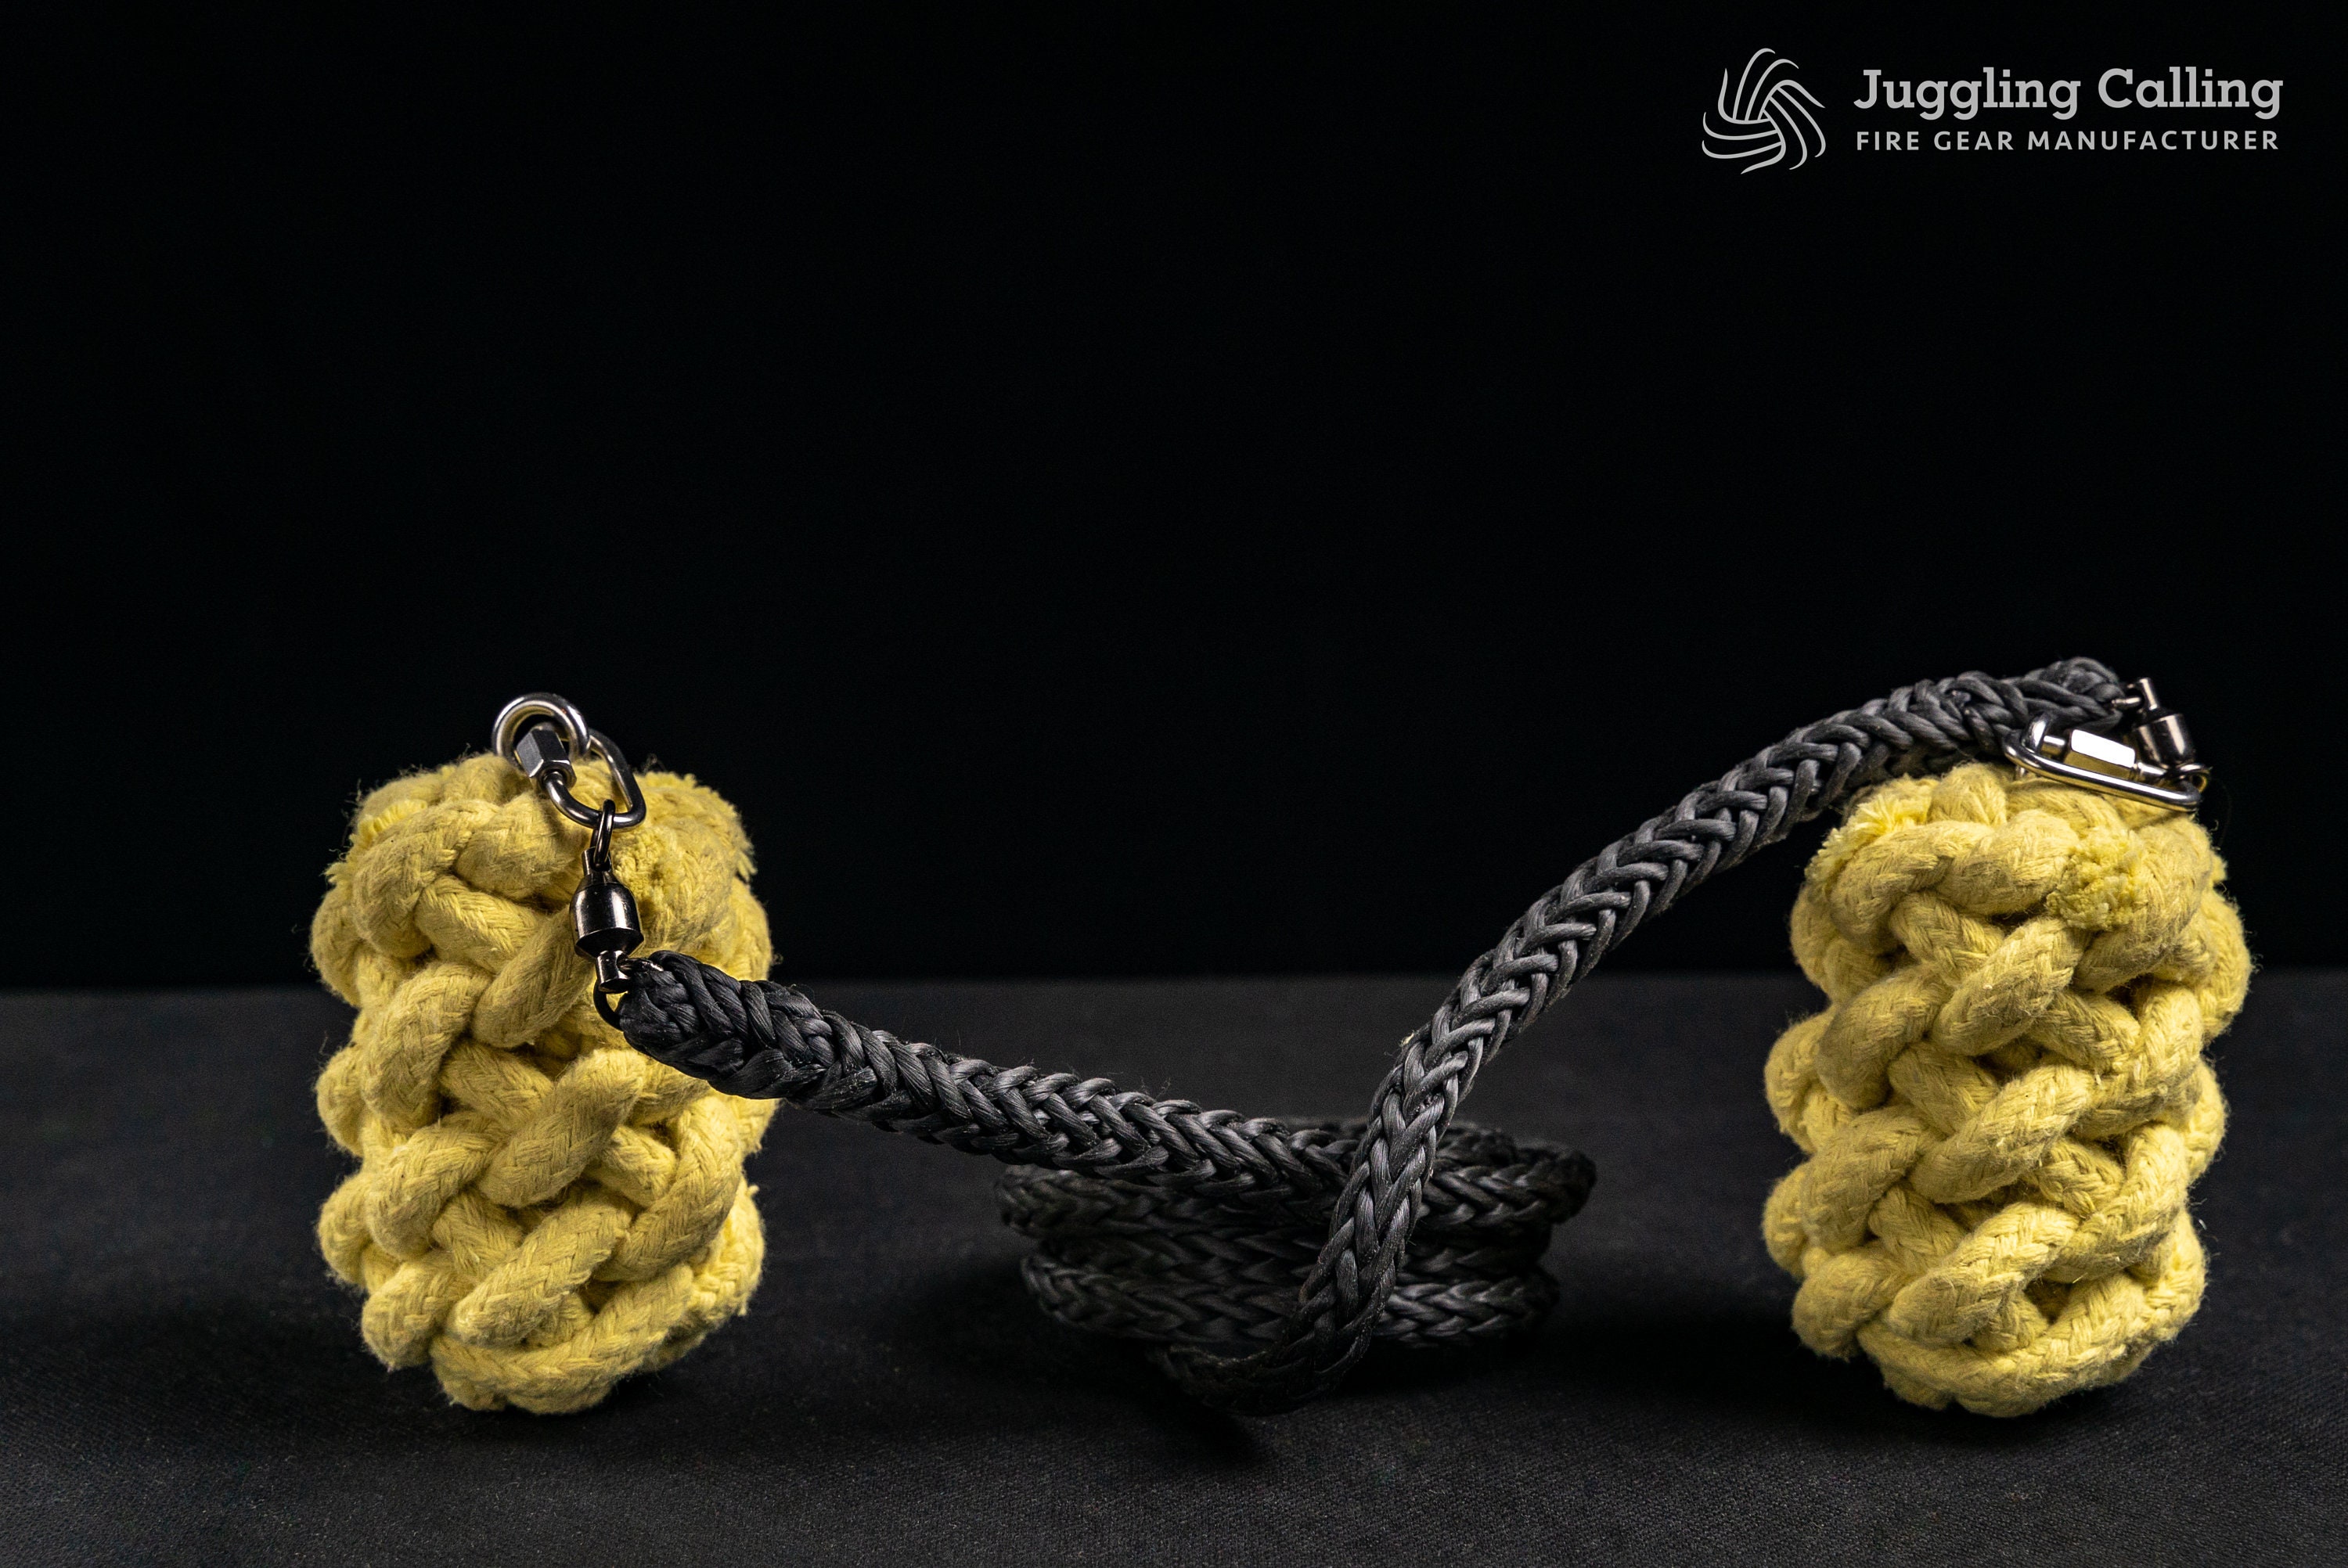 Fire & Practice Rope Dart 100% Pure Kevlar Heads Dyneema and